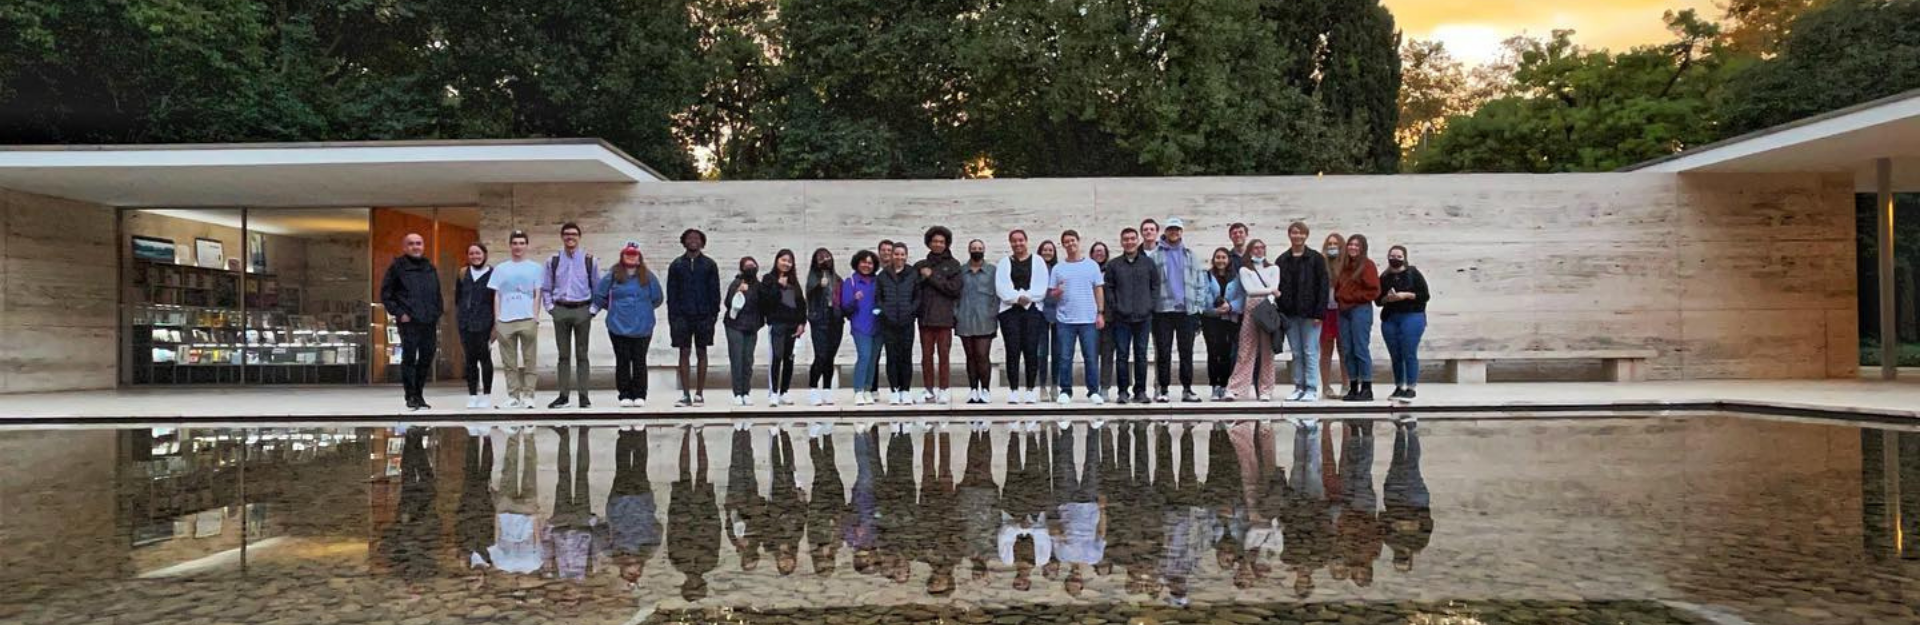 Students in Barcelona in front of water